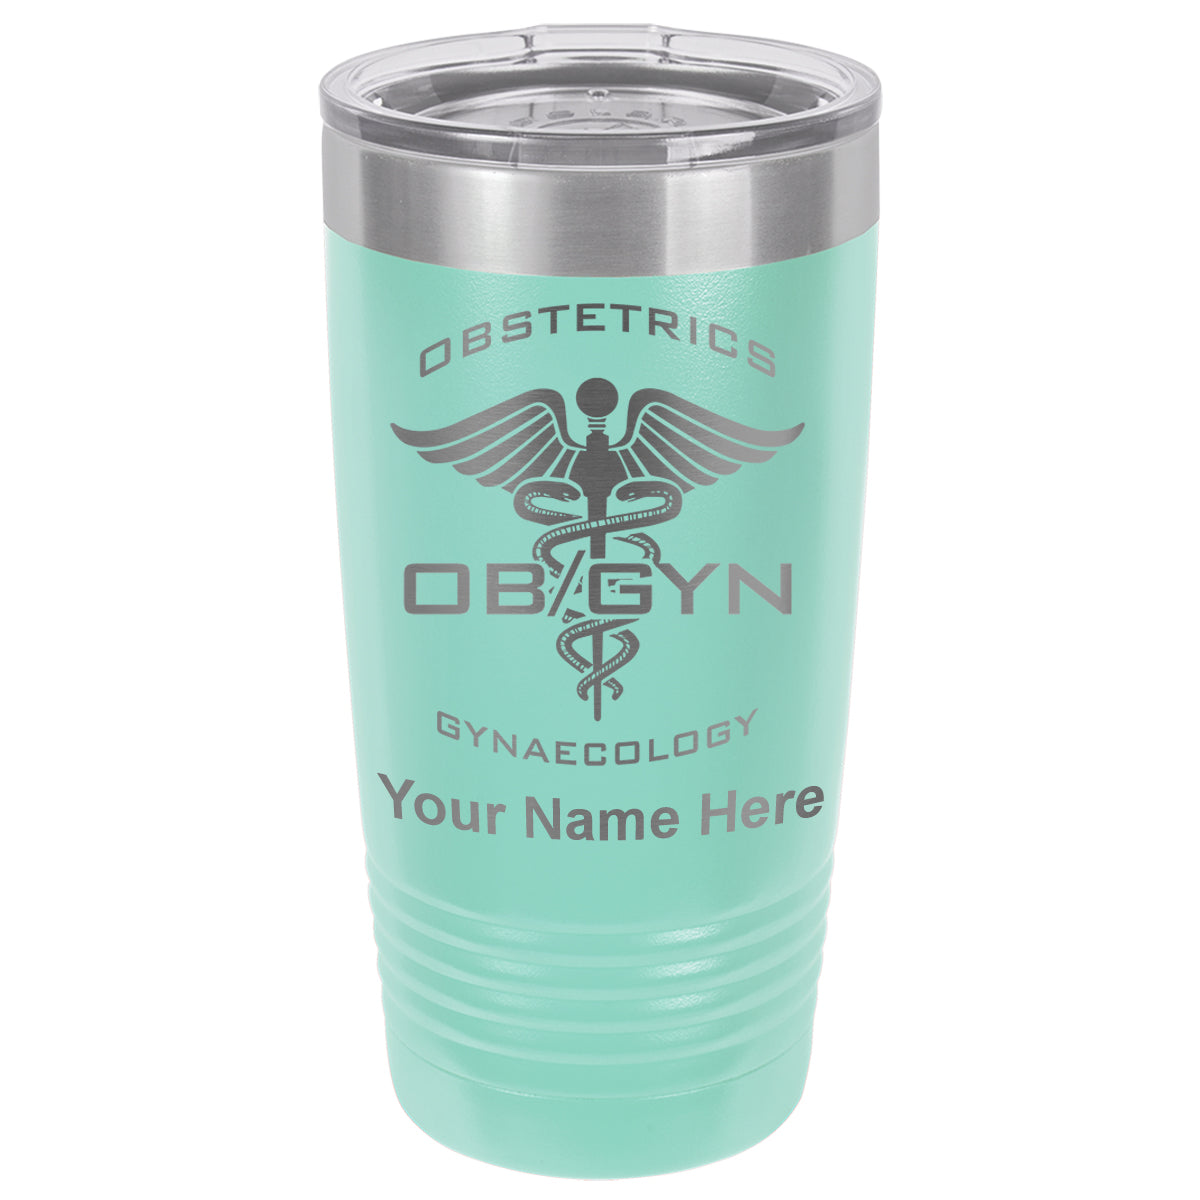 20oz Vacuum Insulated Tumbler Mug, OBGYN Obstetrics and Gynaecology, Personalized Engraving Included